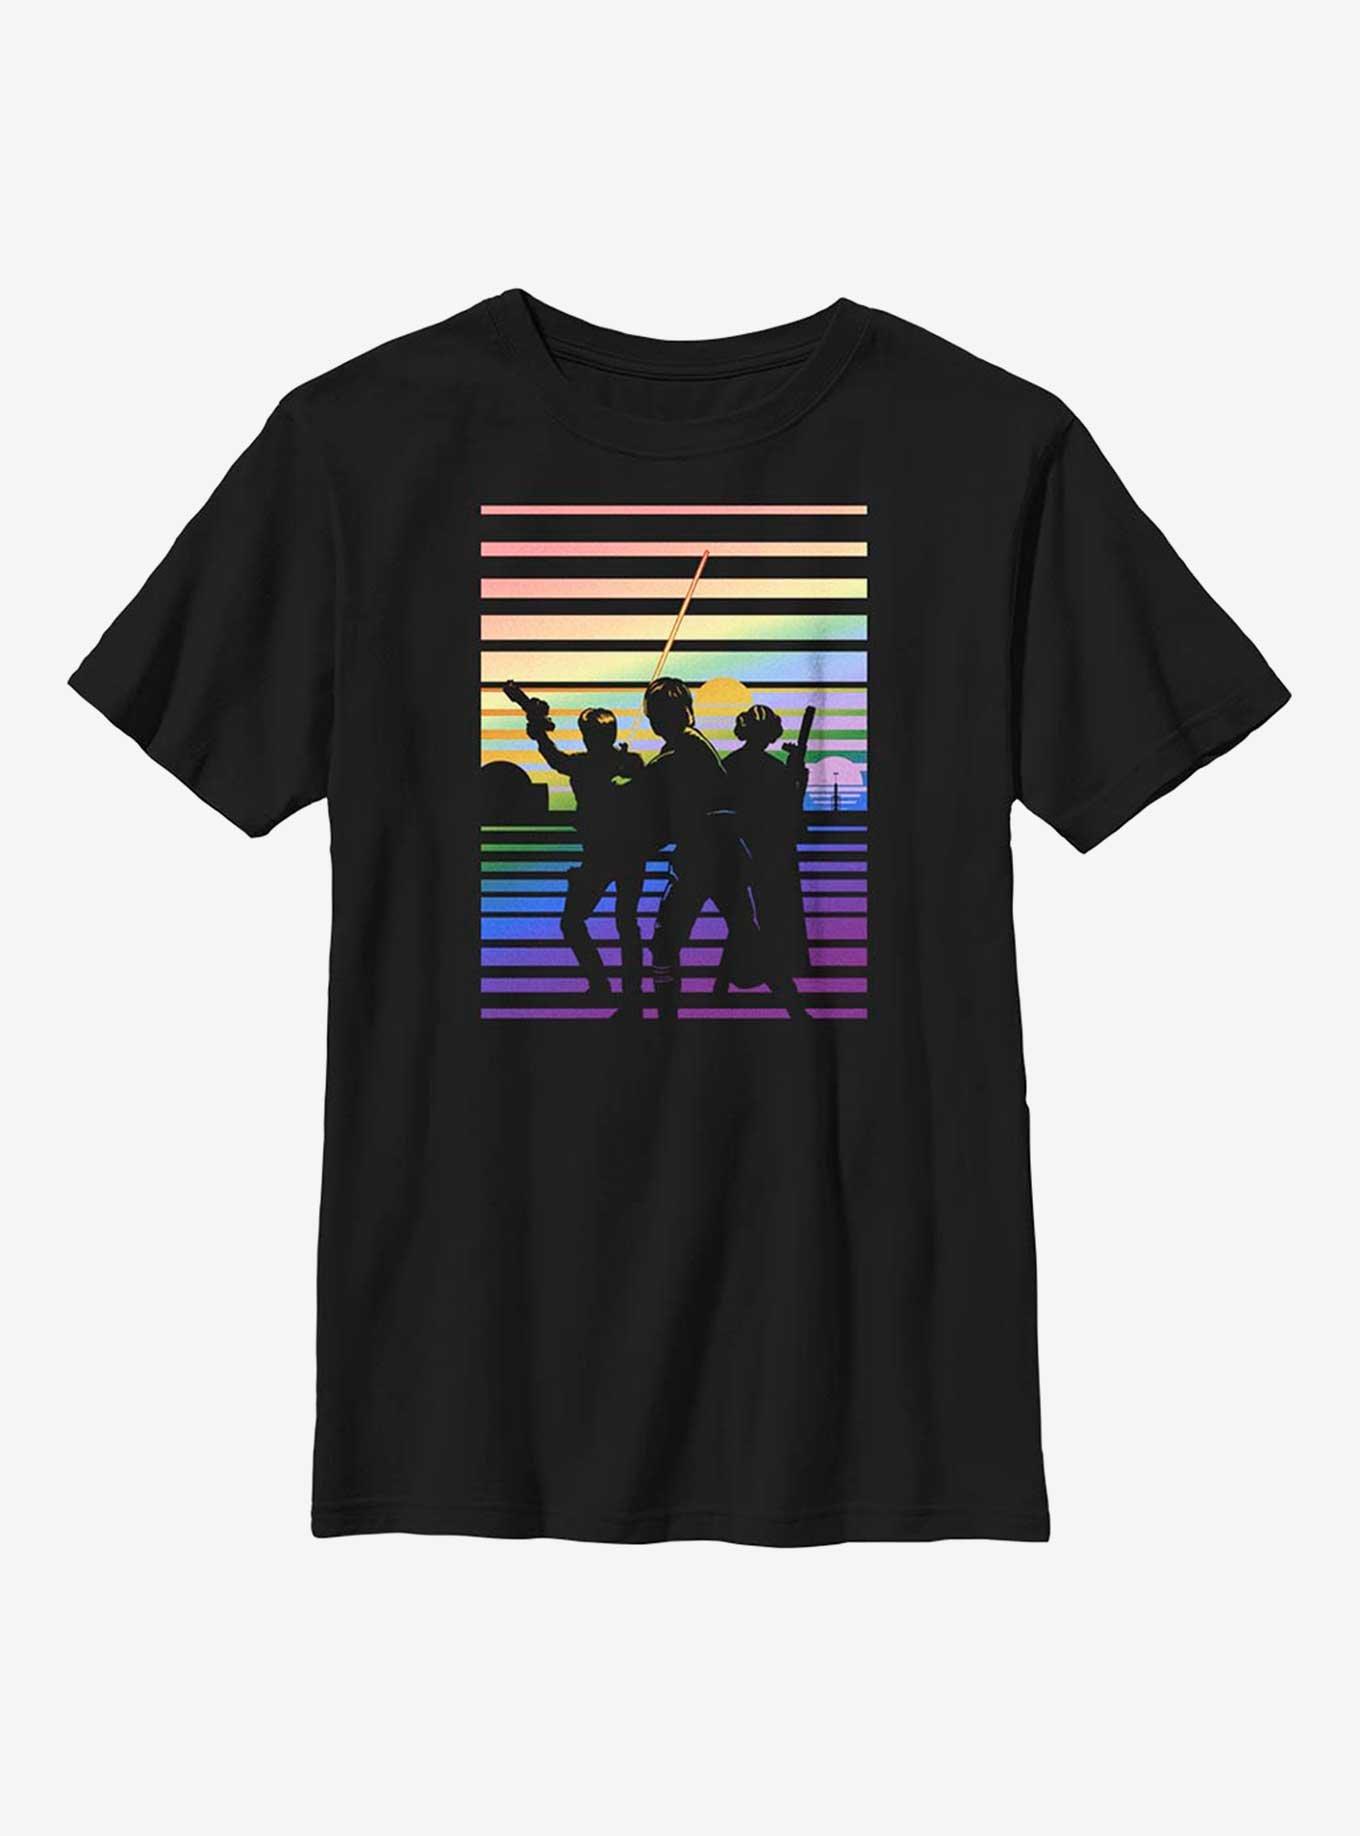 Star Wars Sunset Silhouette Youth T-Shirt, BLACK, hi-res